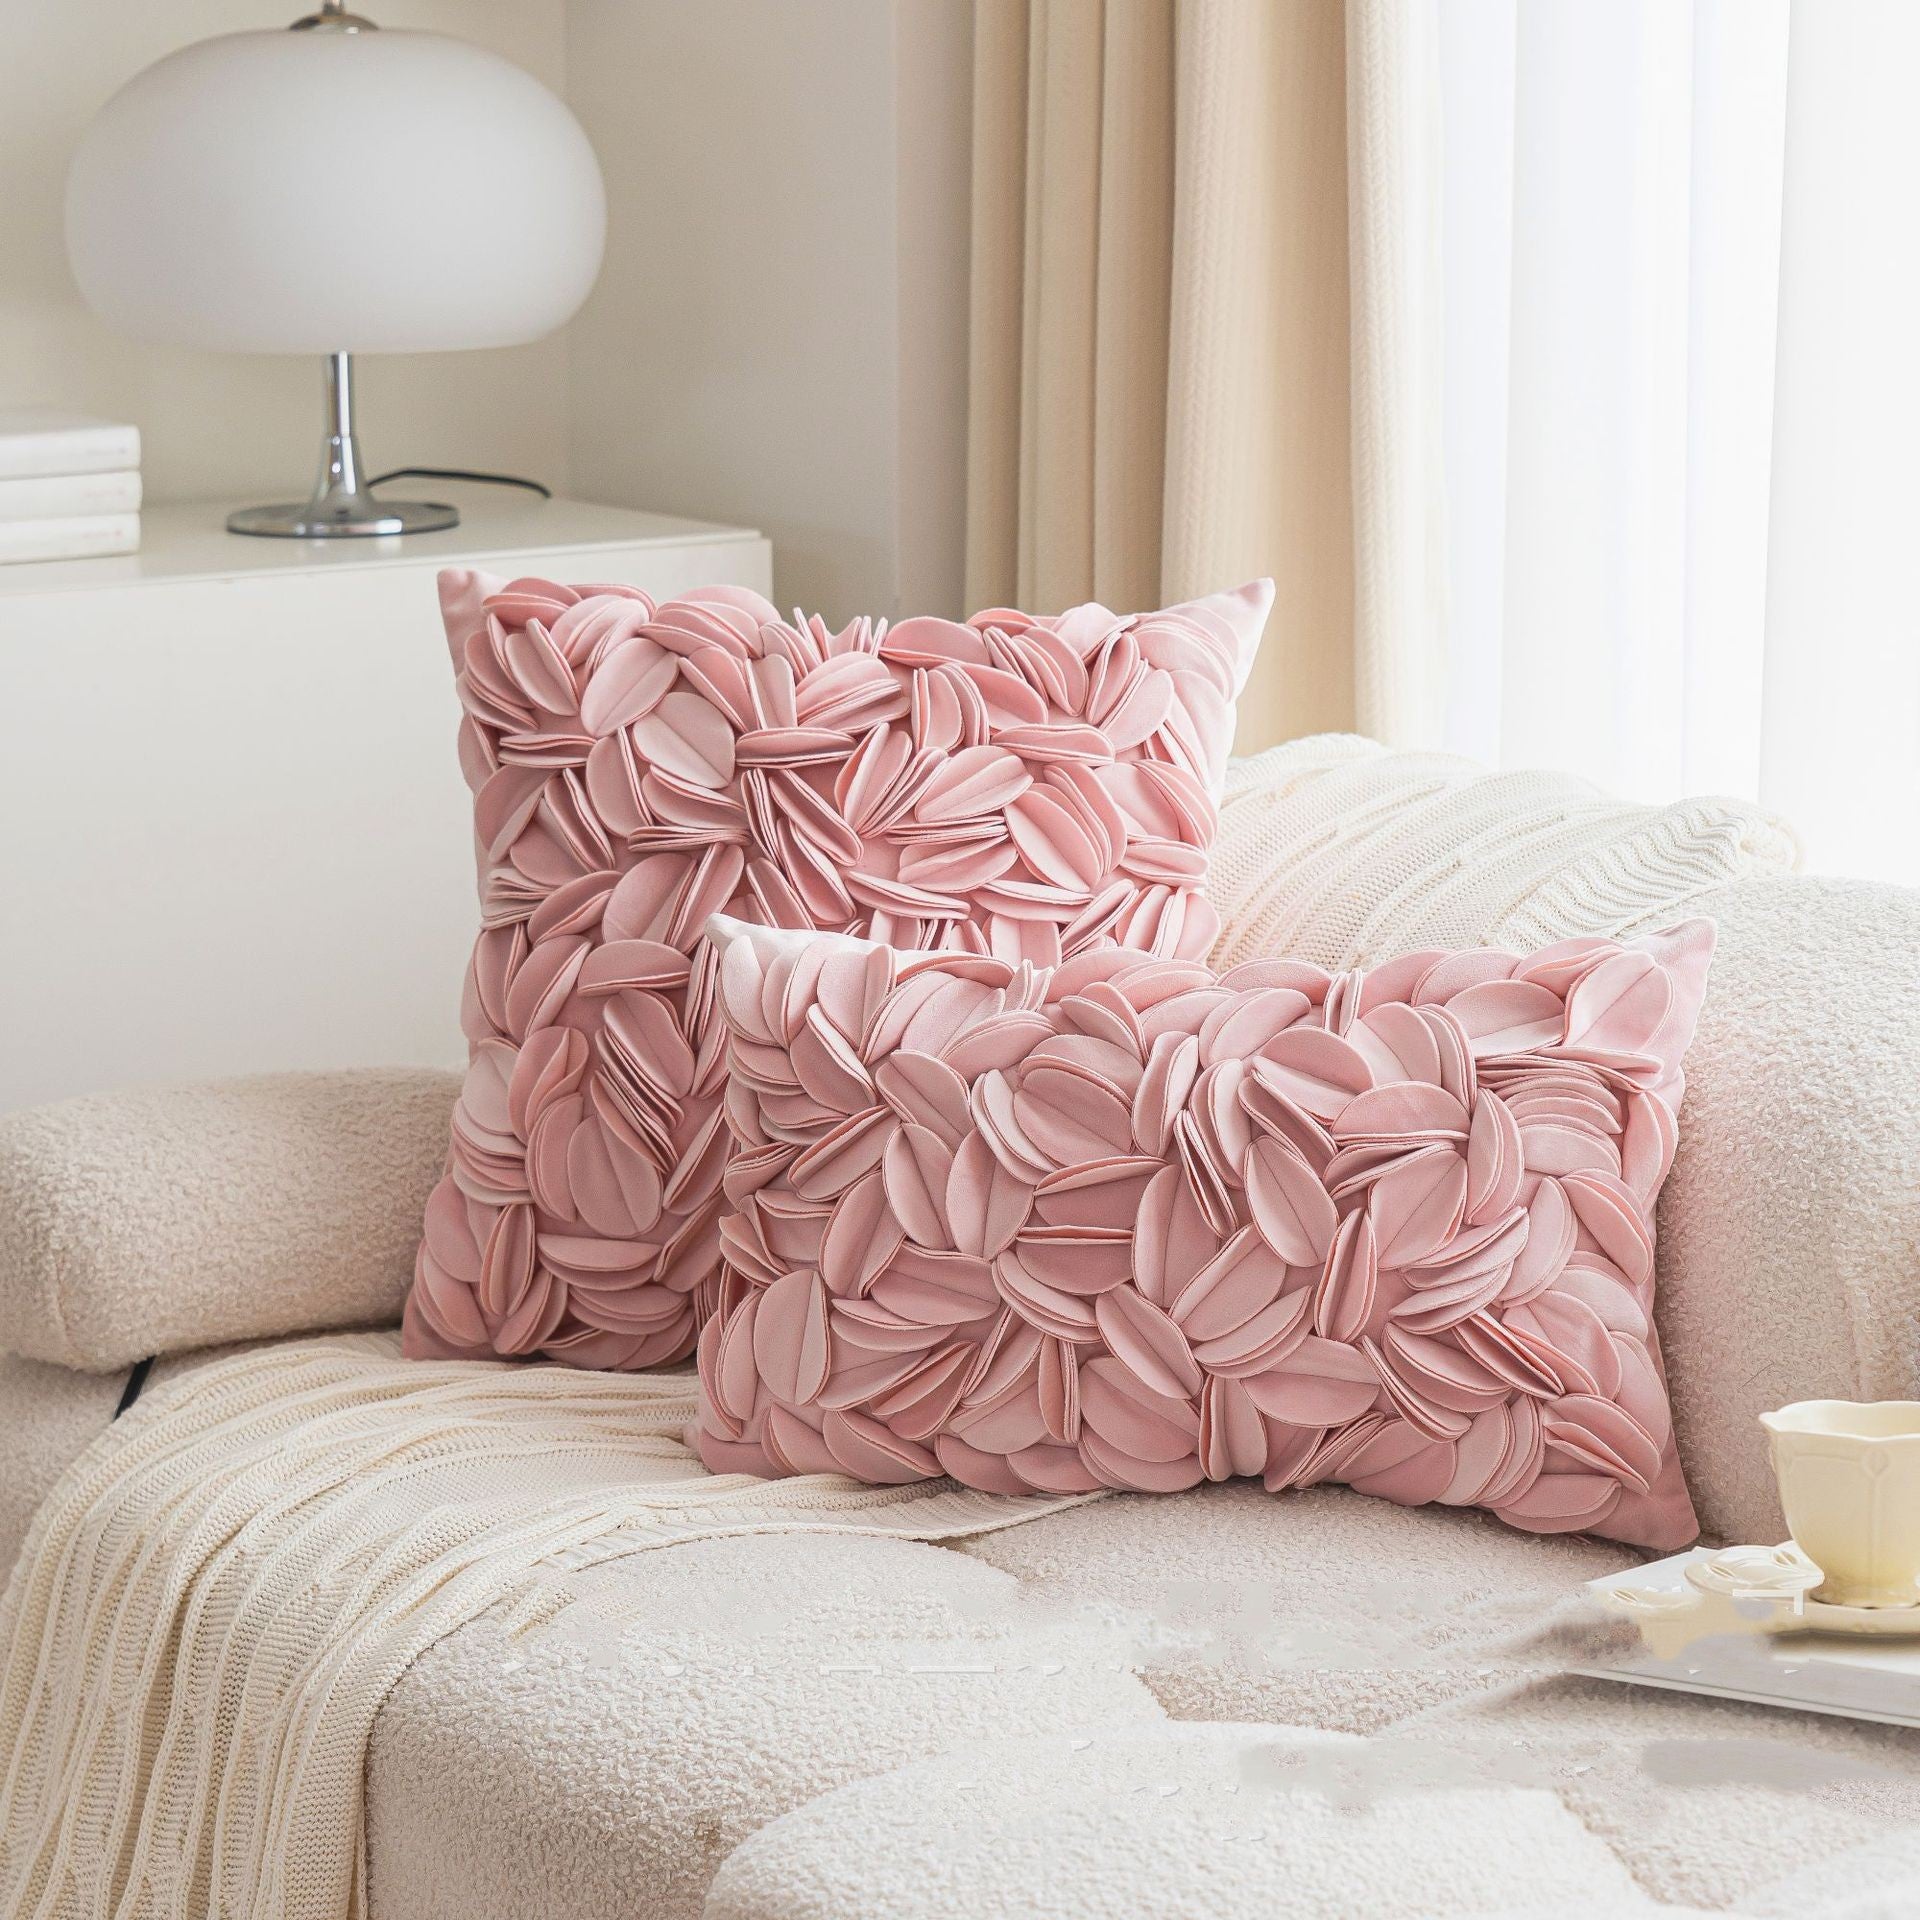 Ins Style Handmade Decorative Pillowcase Cover